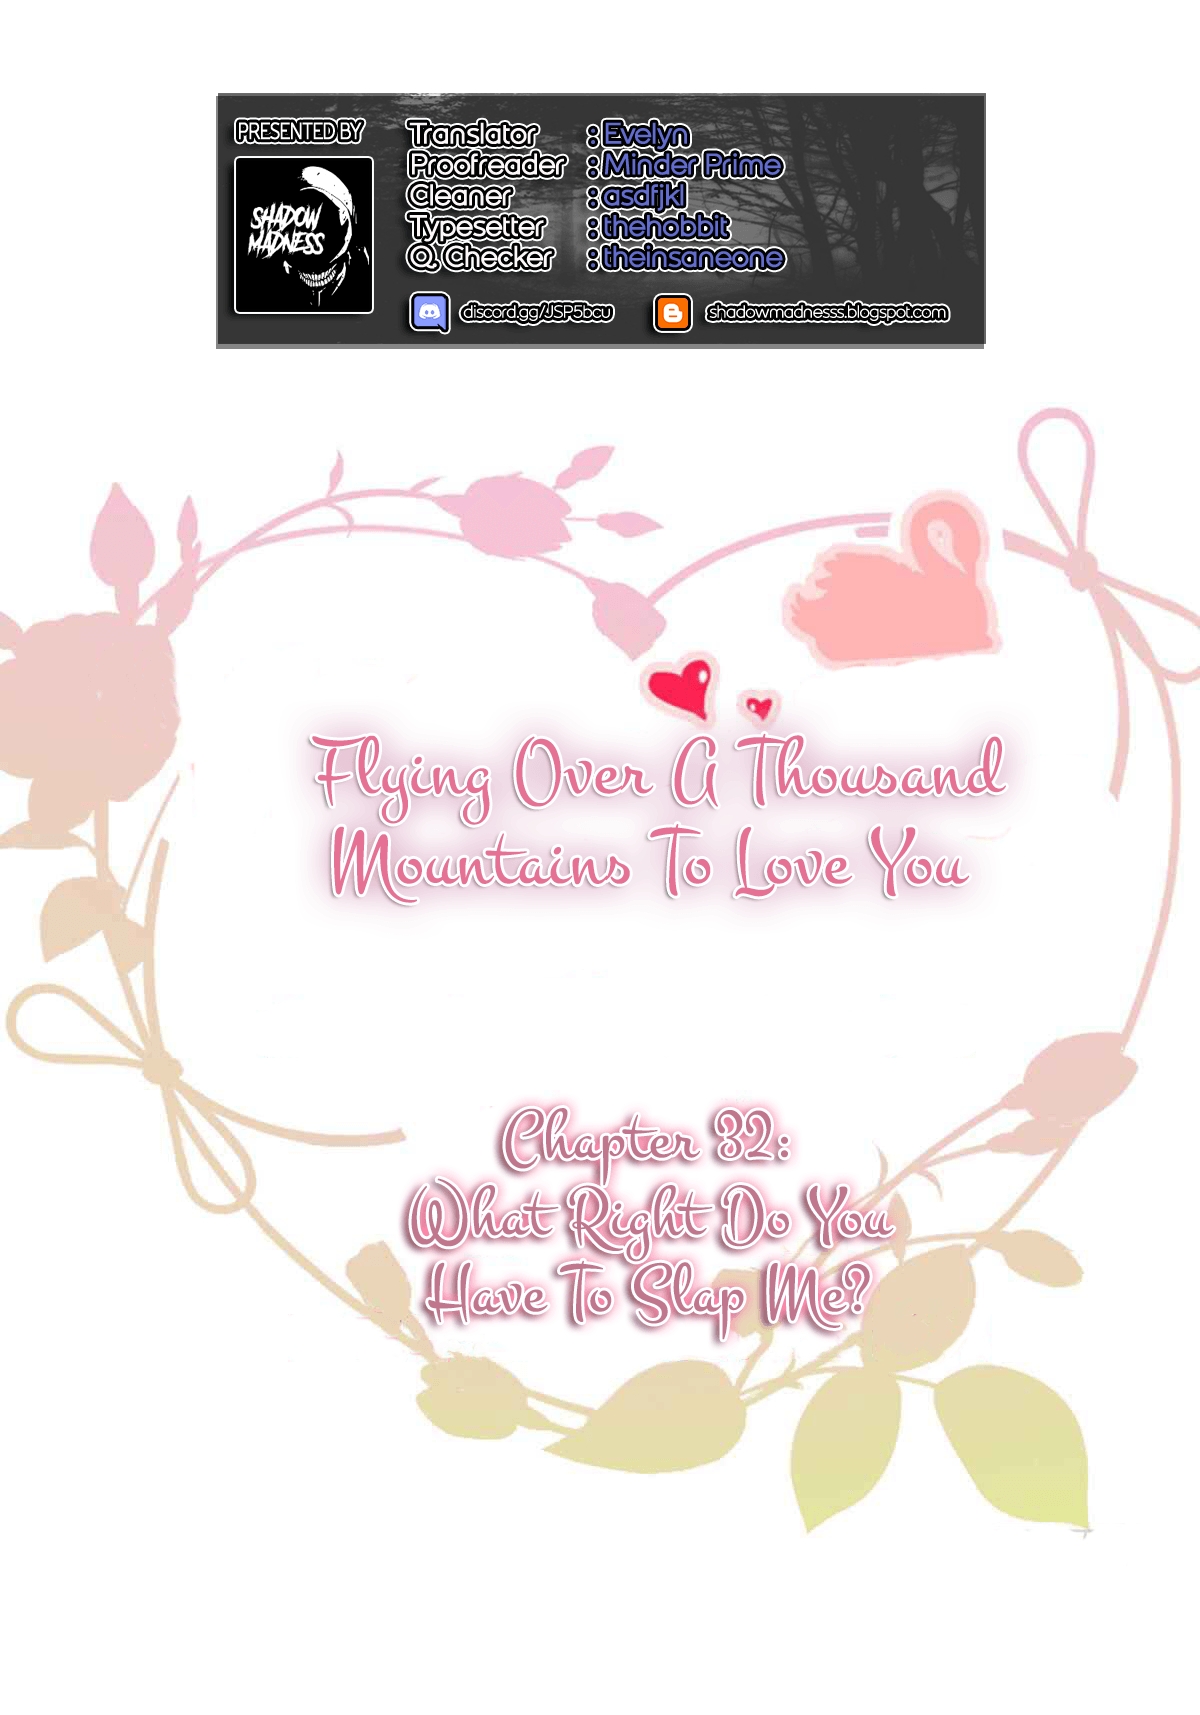 Flying Over a Thousand Mountains to Love You Ch. 32 What right do you have to slap me?